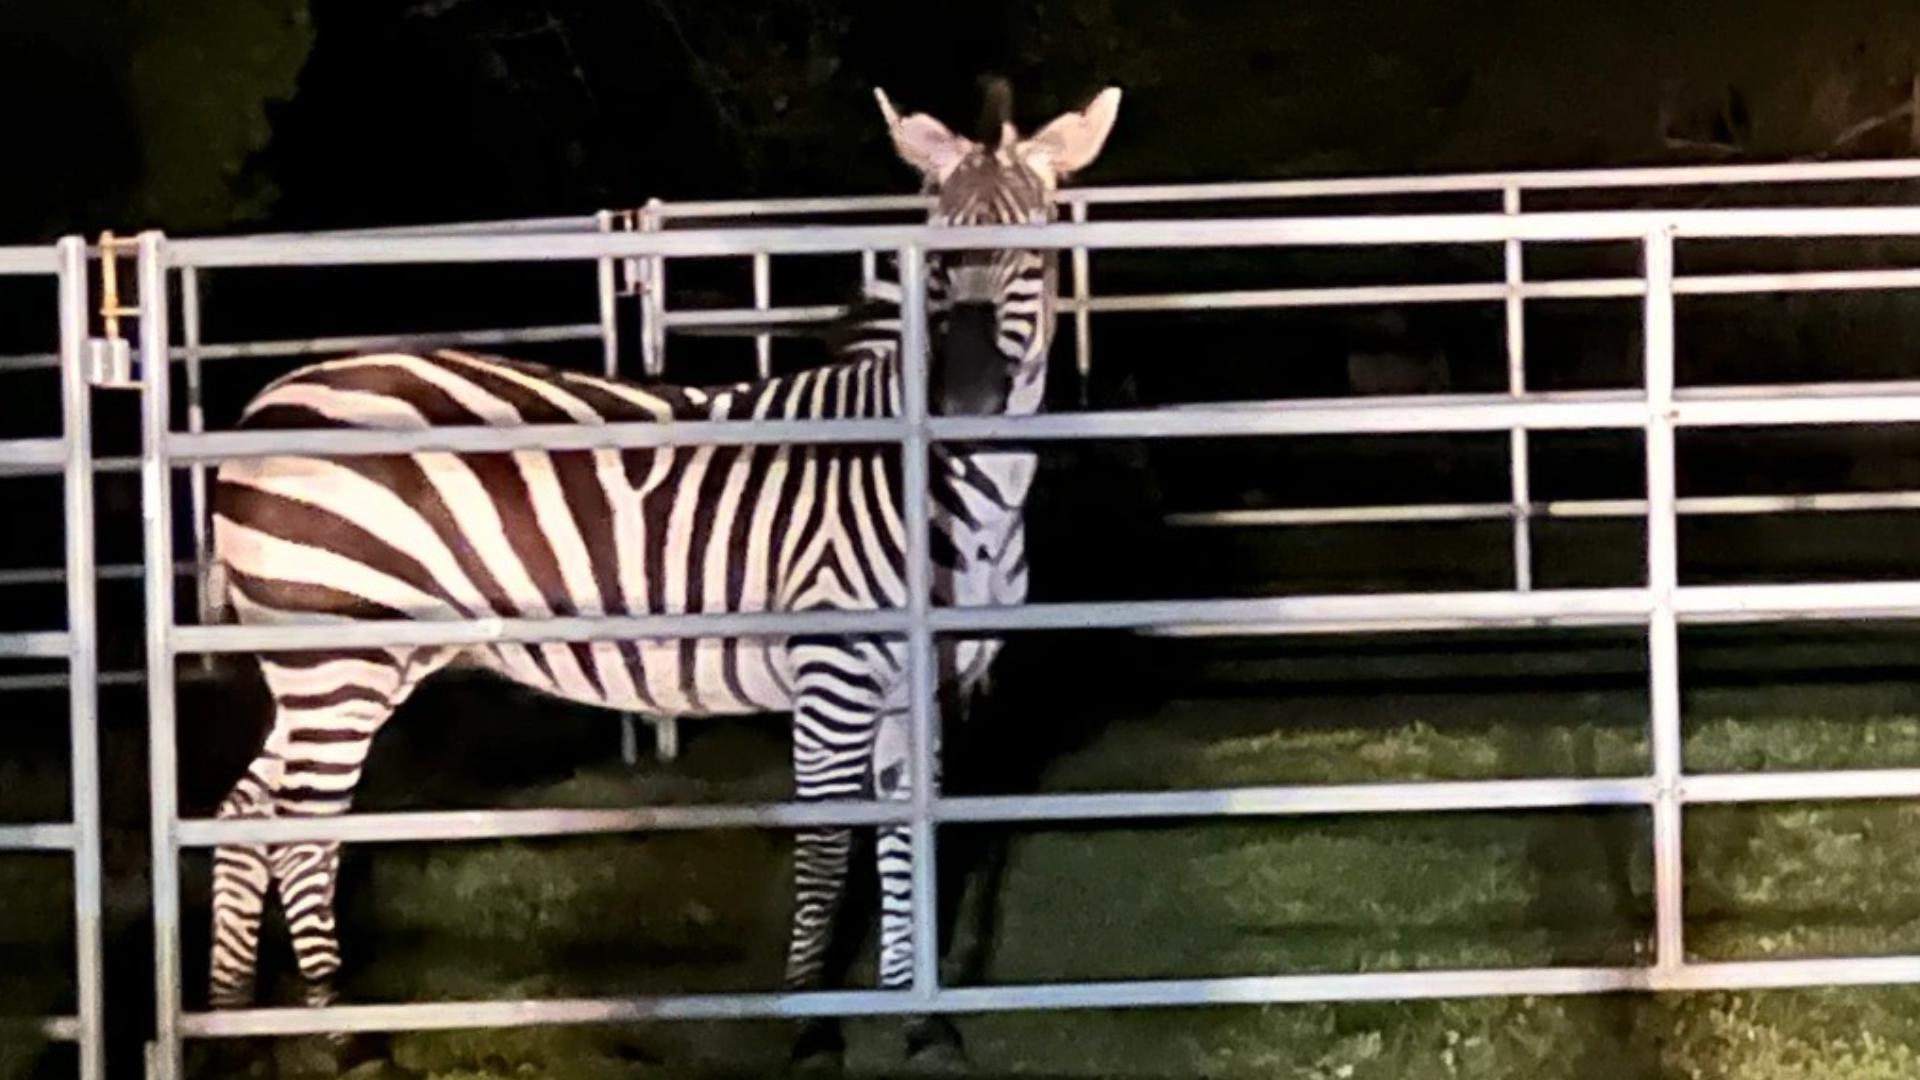 The zebra was captured near the Riverbend neighborhood after being on the loose for almost six days.